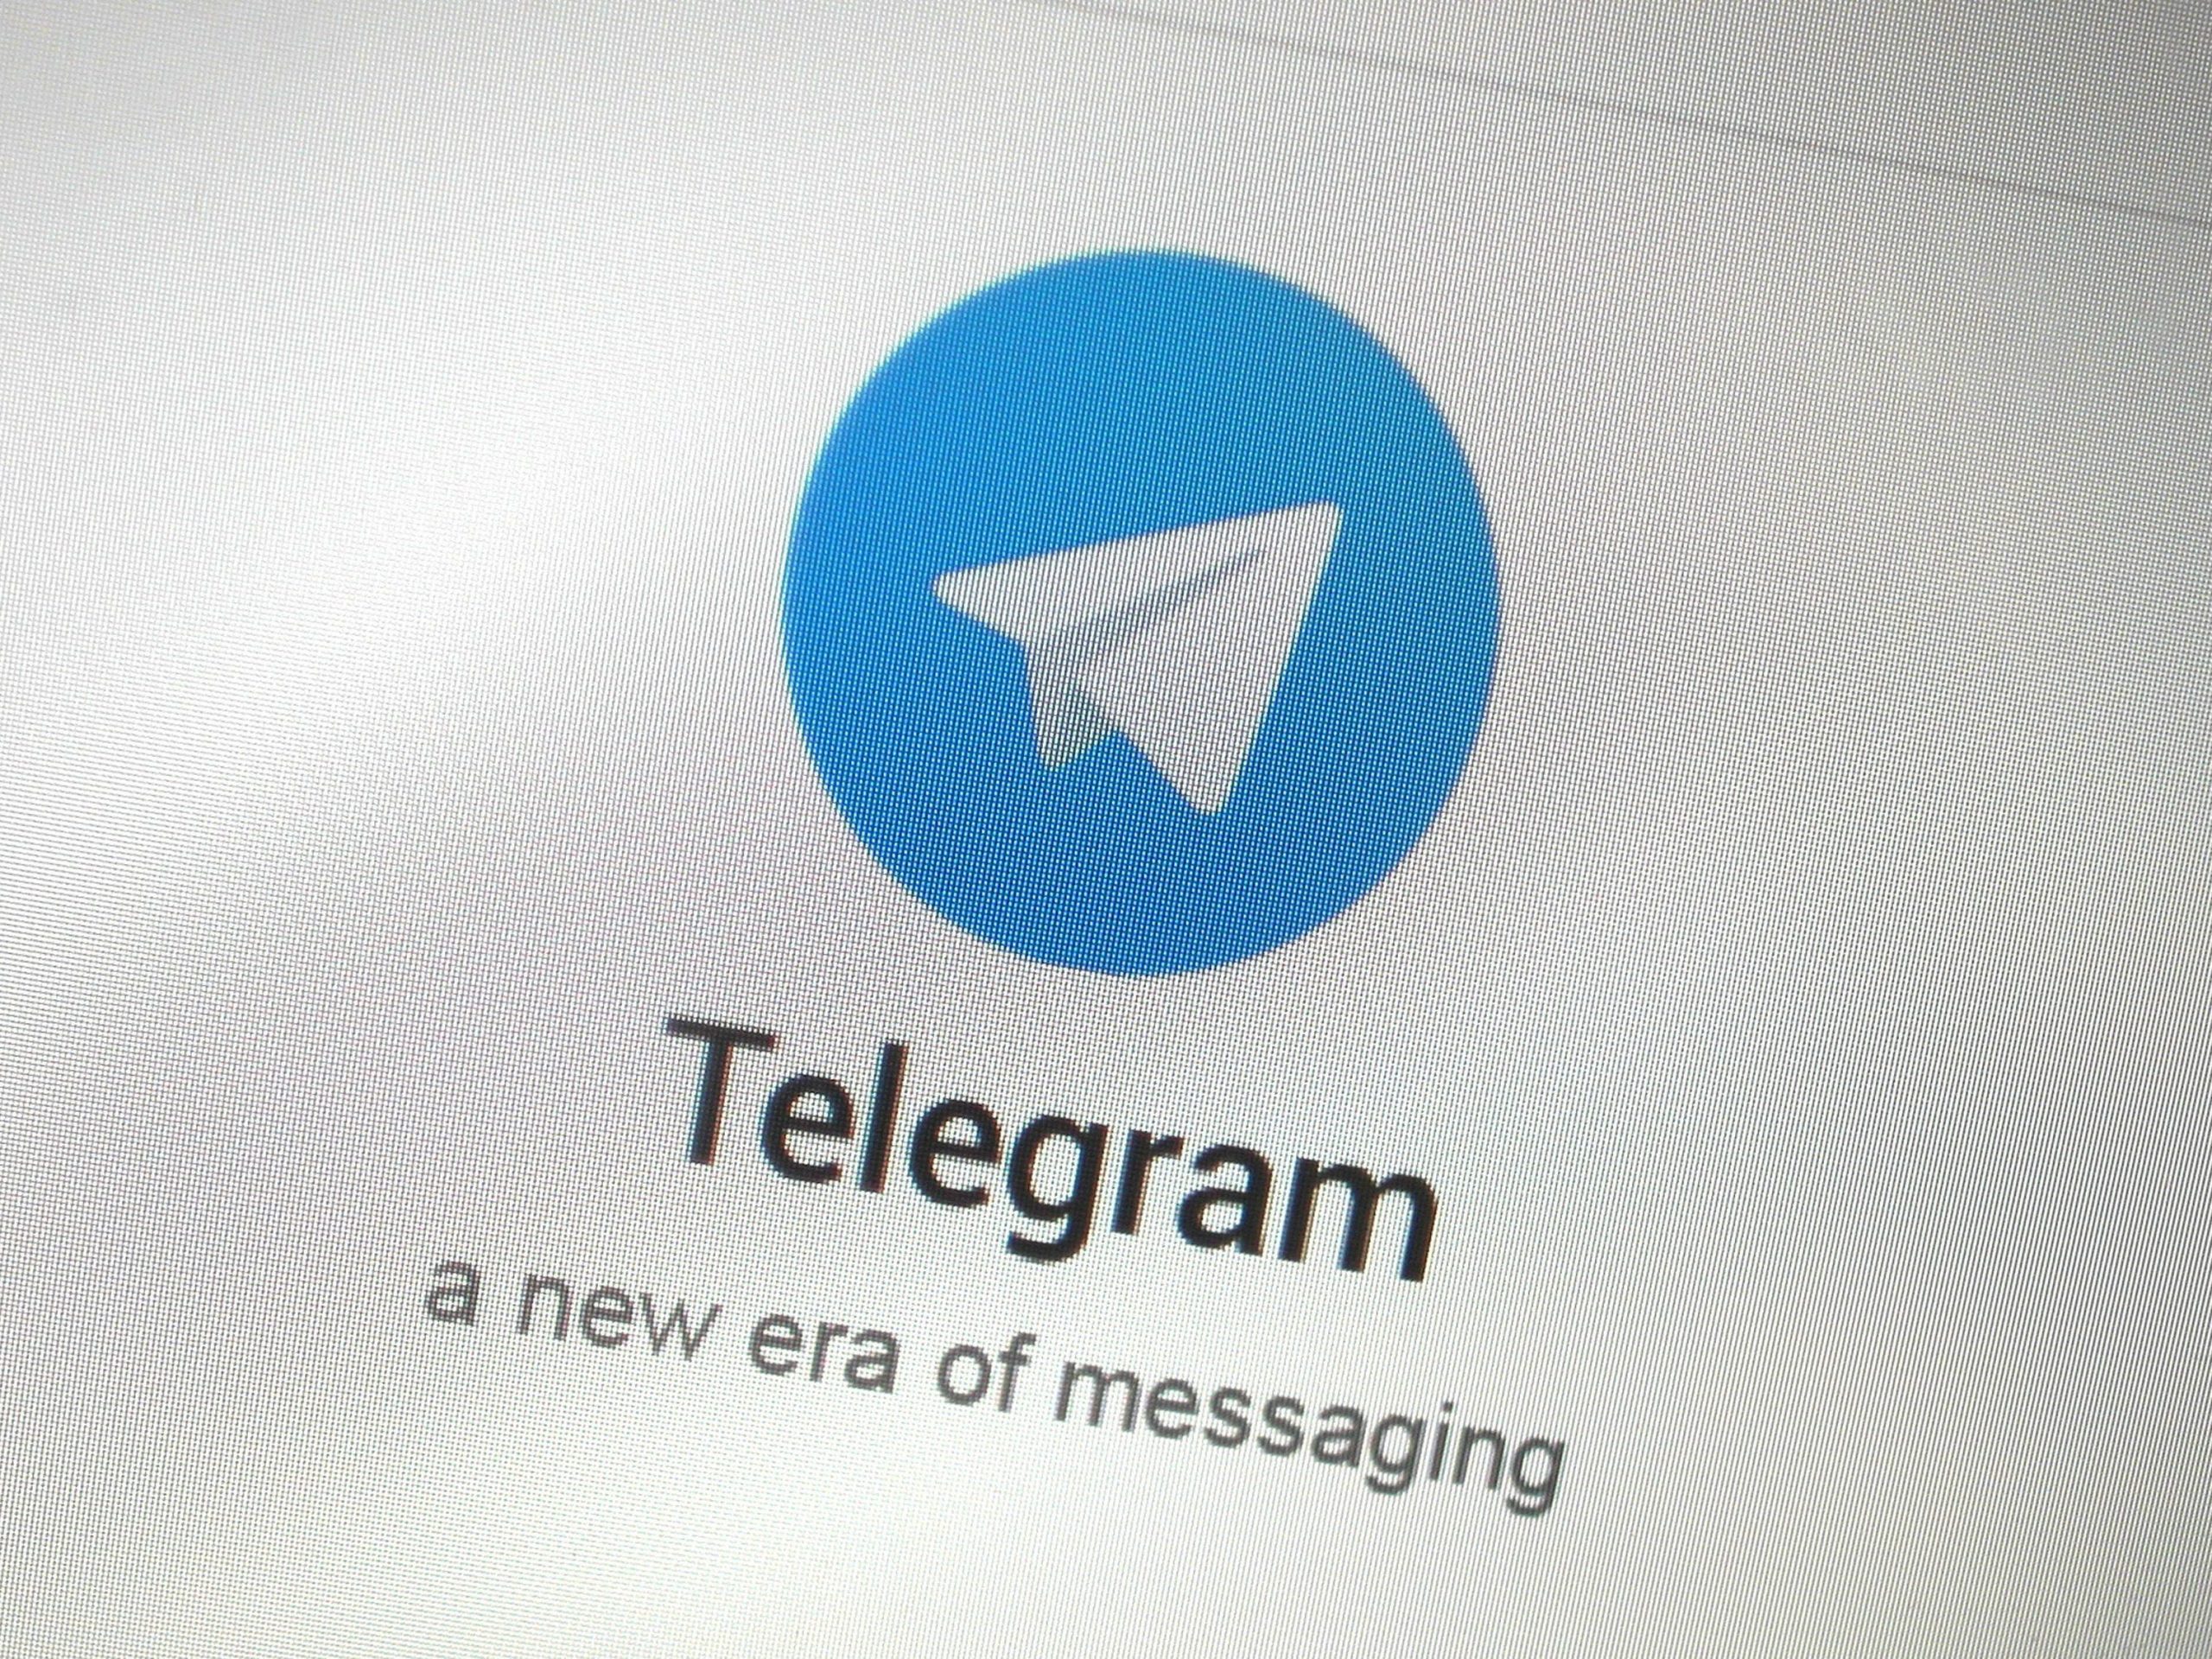 FILE PHOTO: The Telegram messaging app logo is seen on a website in Singapore November 19, 2015.   REUTERS/Thomas White/File Photo